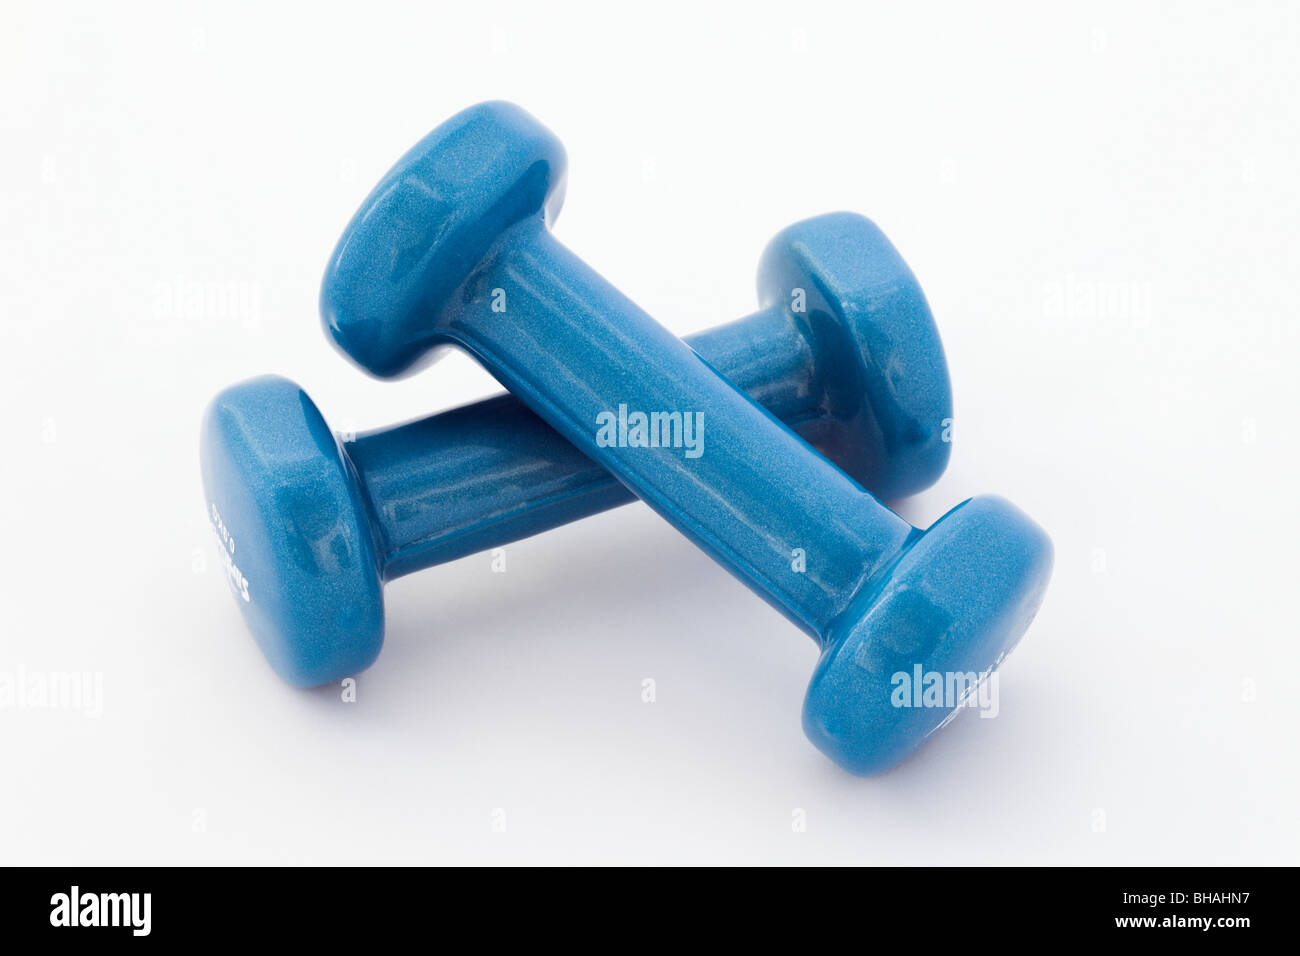 Pair of small blue dumbbell exercise weights cut out and isolated on a ...